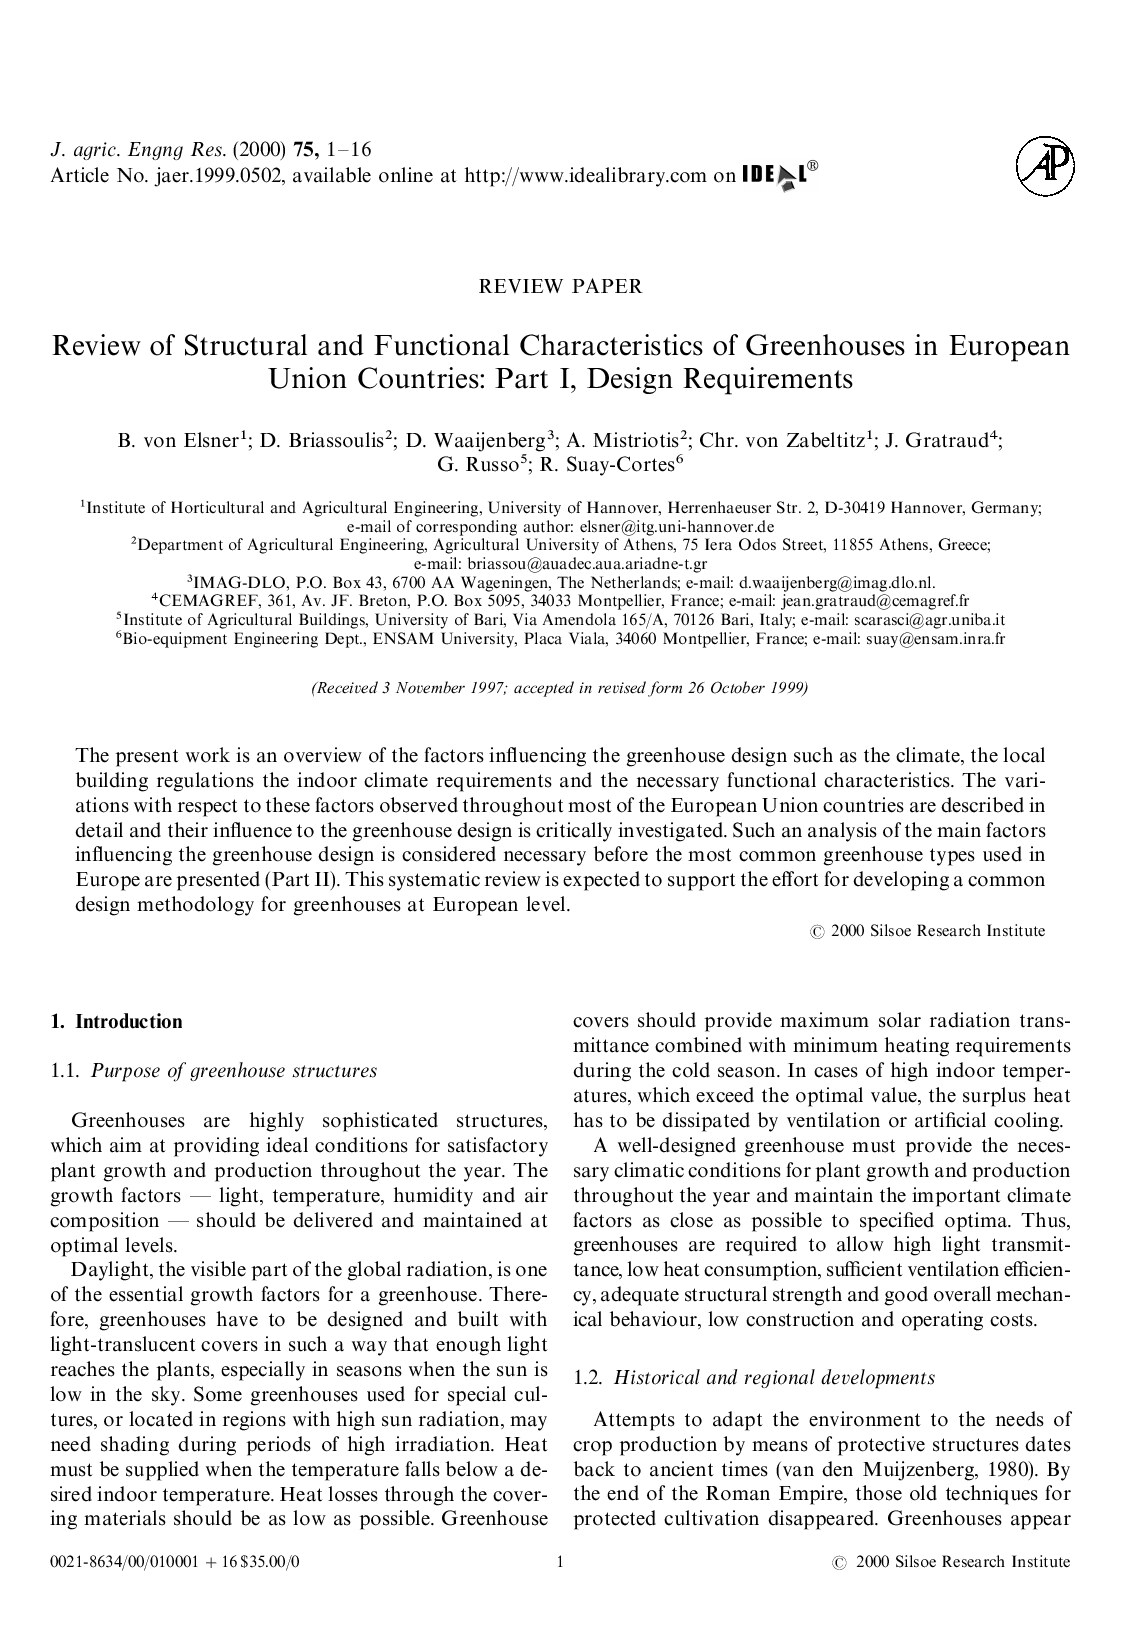 Review of Structural and Functional Characteristics of Greenhouses in European